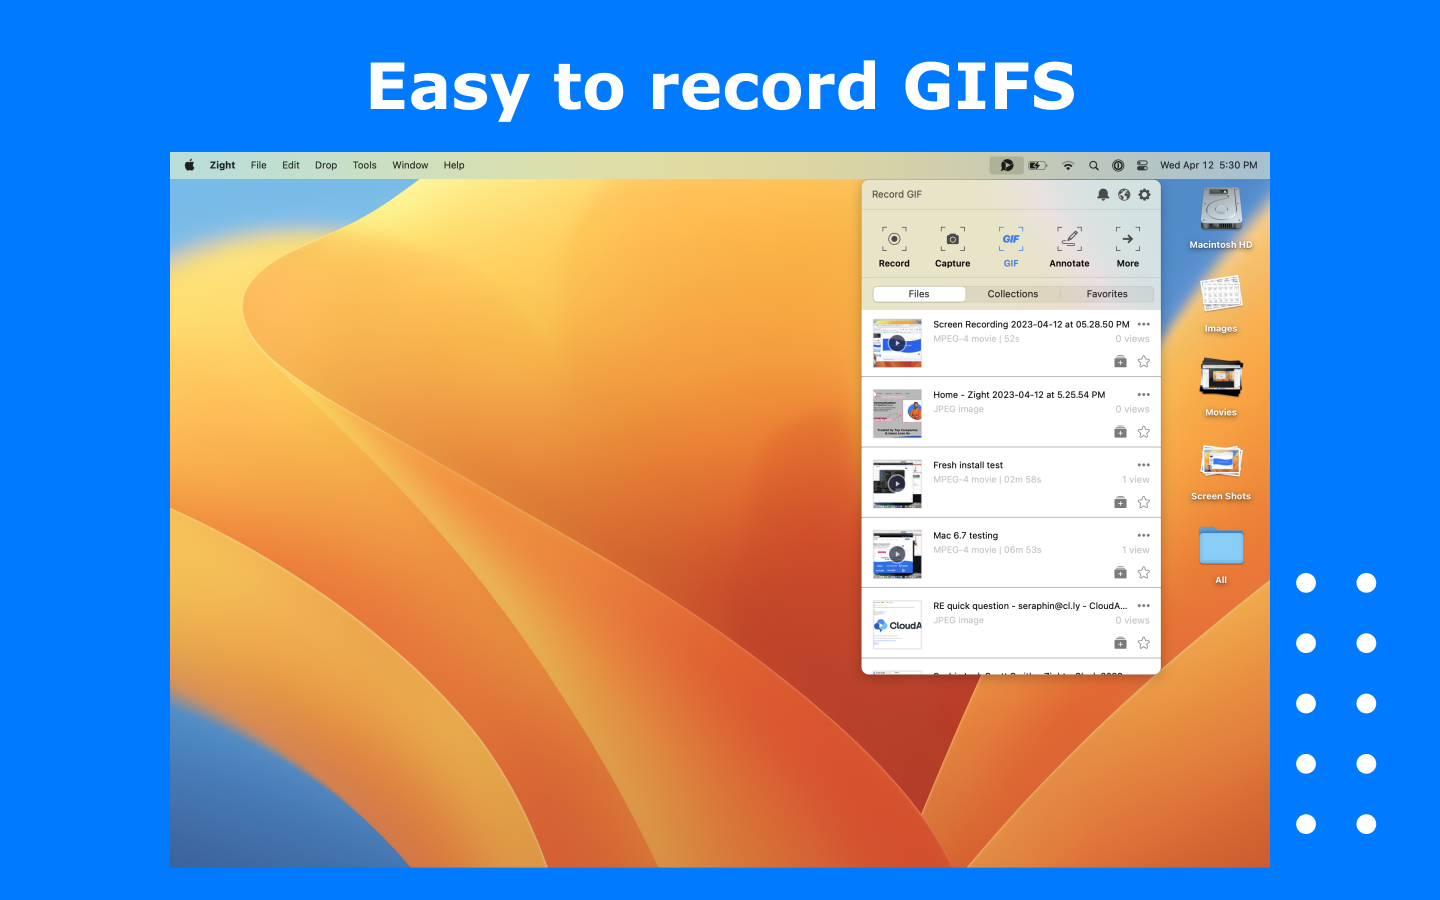 Screen to Gif 2.7 free download - Software reviews, downloads, news, free  trials, freeware and full commercial software - Downloadcrew